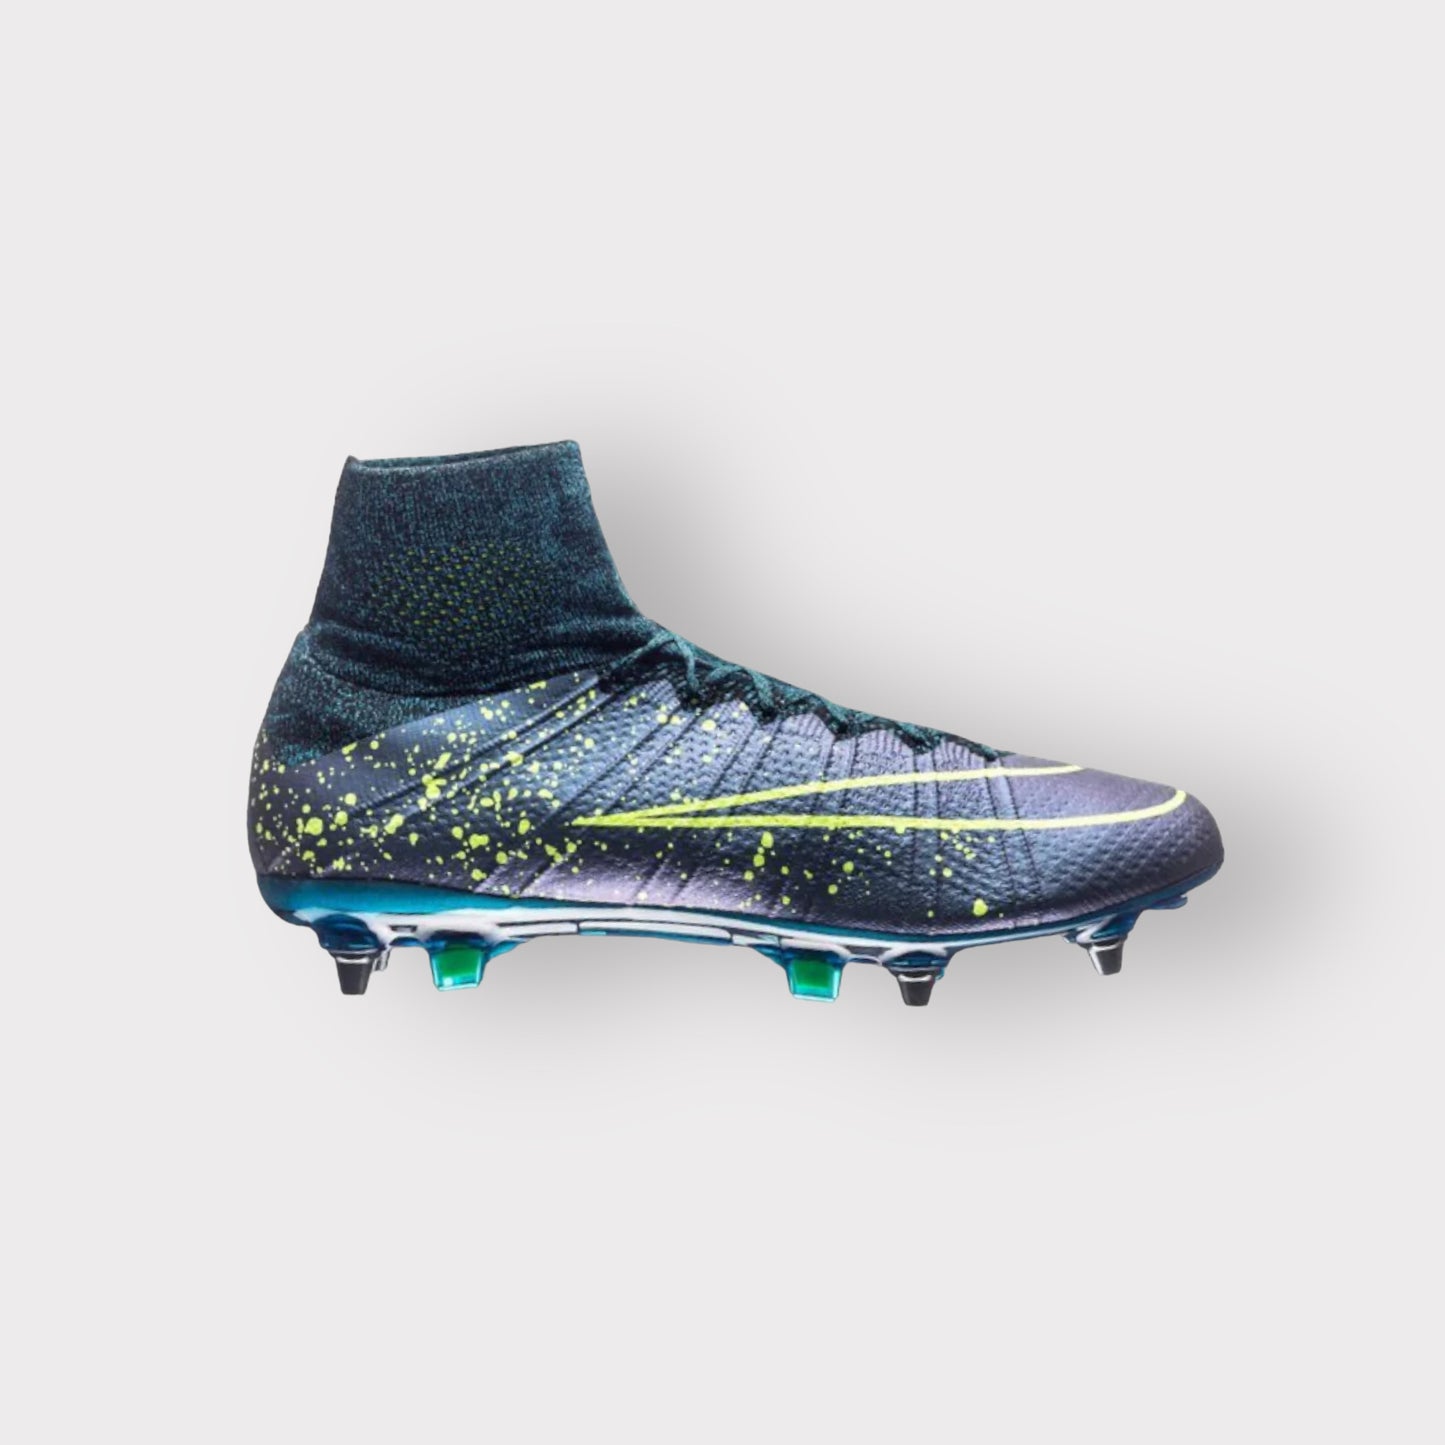 NIKE MERCURIAL SUPERFLY IV SG-PRO